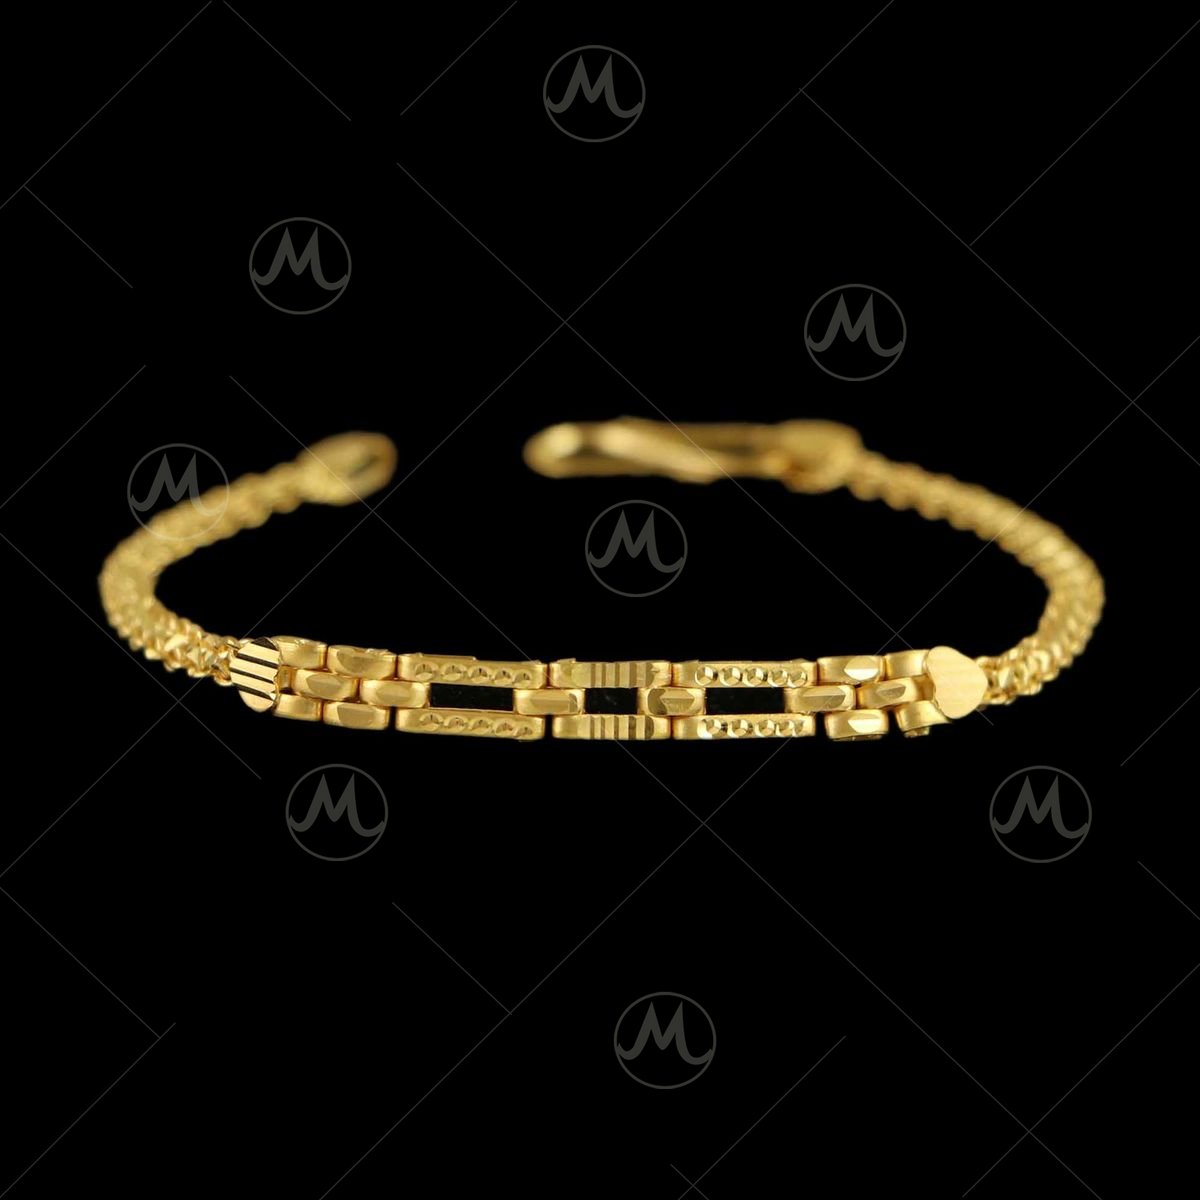 Caratlane Ek Onkar Baby Nazaria Gold Bracelet 14 Kt Yellow Gold Online in  India, Buy at Best Price from Firstcry.com - 11348223